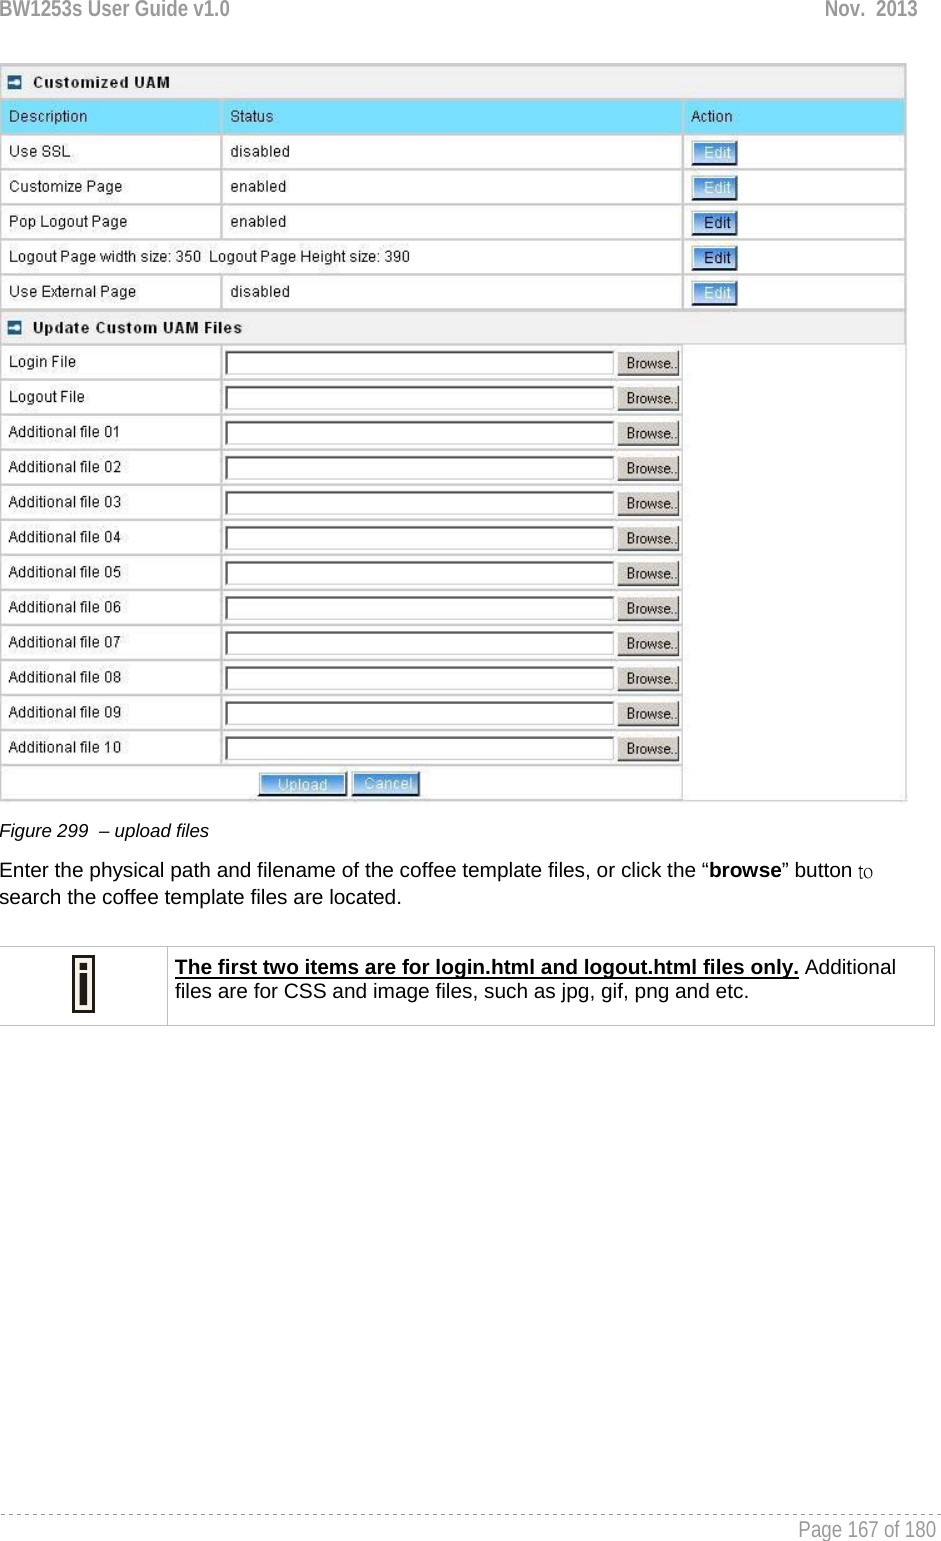 BW1253s User Guide v1.0  Nov.  2013     Page 167 of 180    Figure 299  – upload files Enter the physical path and filename of the coffee template files, or click the “browse” button to search the coffee template files are located.    The first two items are for login.html and logout.html files only. Additional files are for CSS and image files, such as jpg, gif, png and etc.   